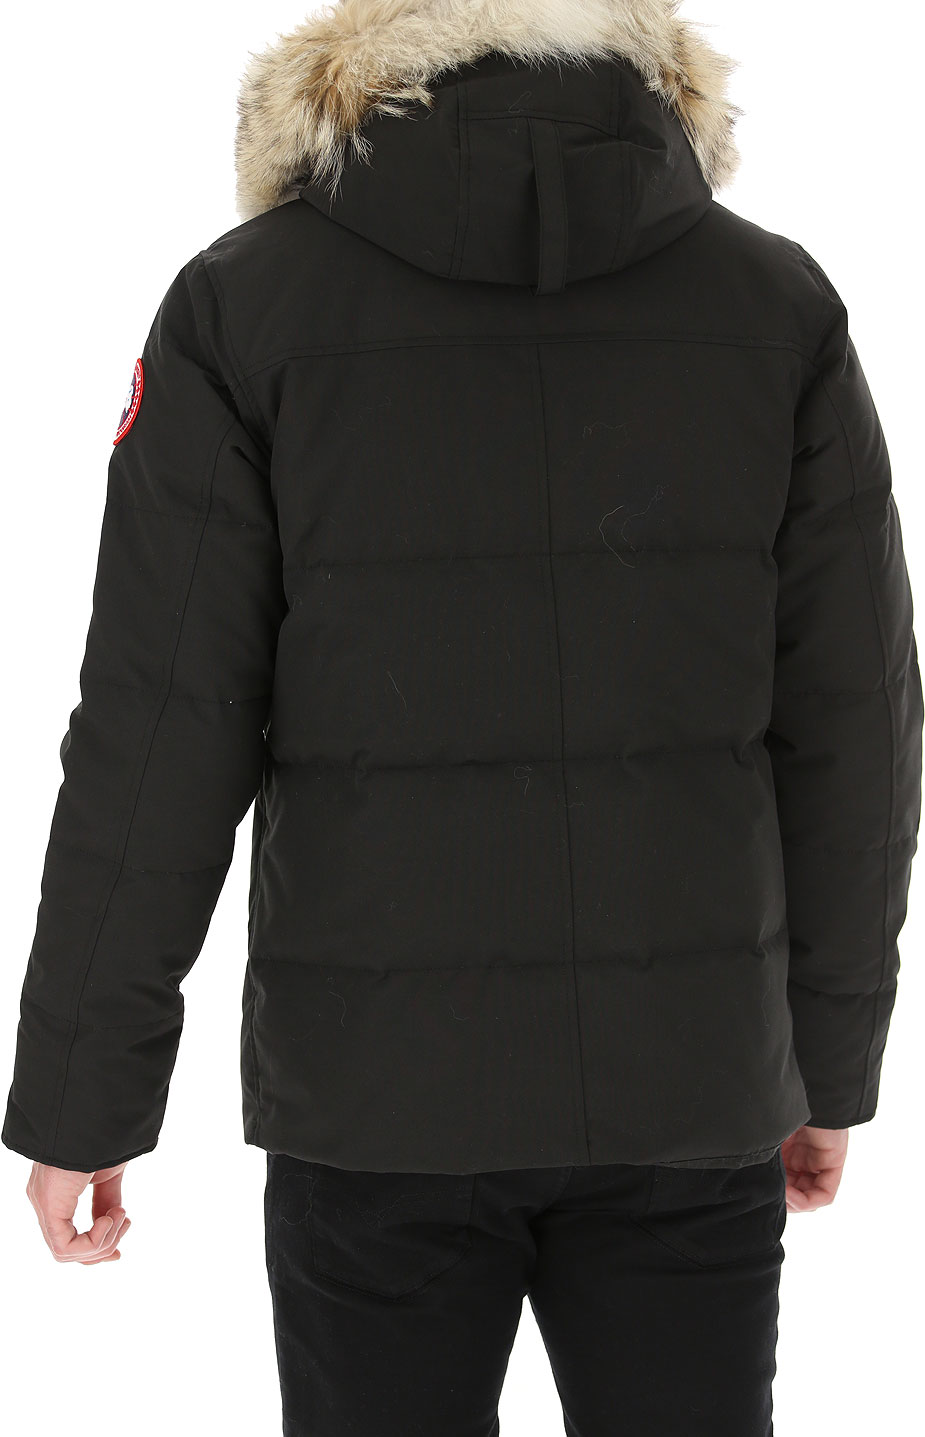 Mens Clothing Canada Goose, Style code: 3808m-61-